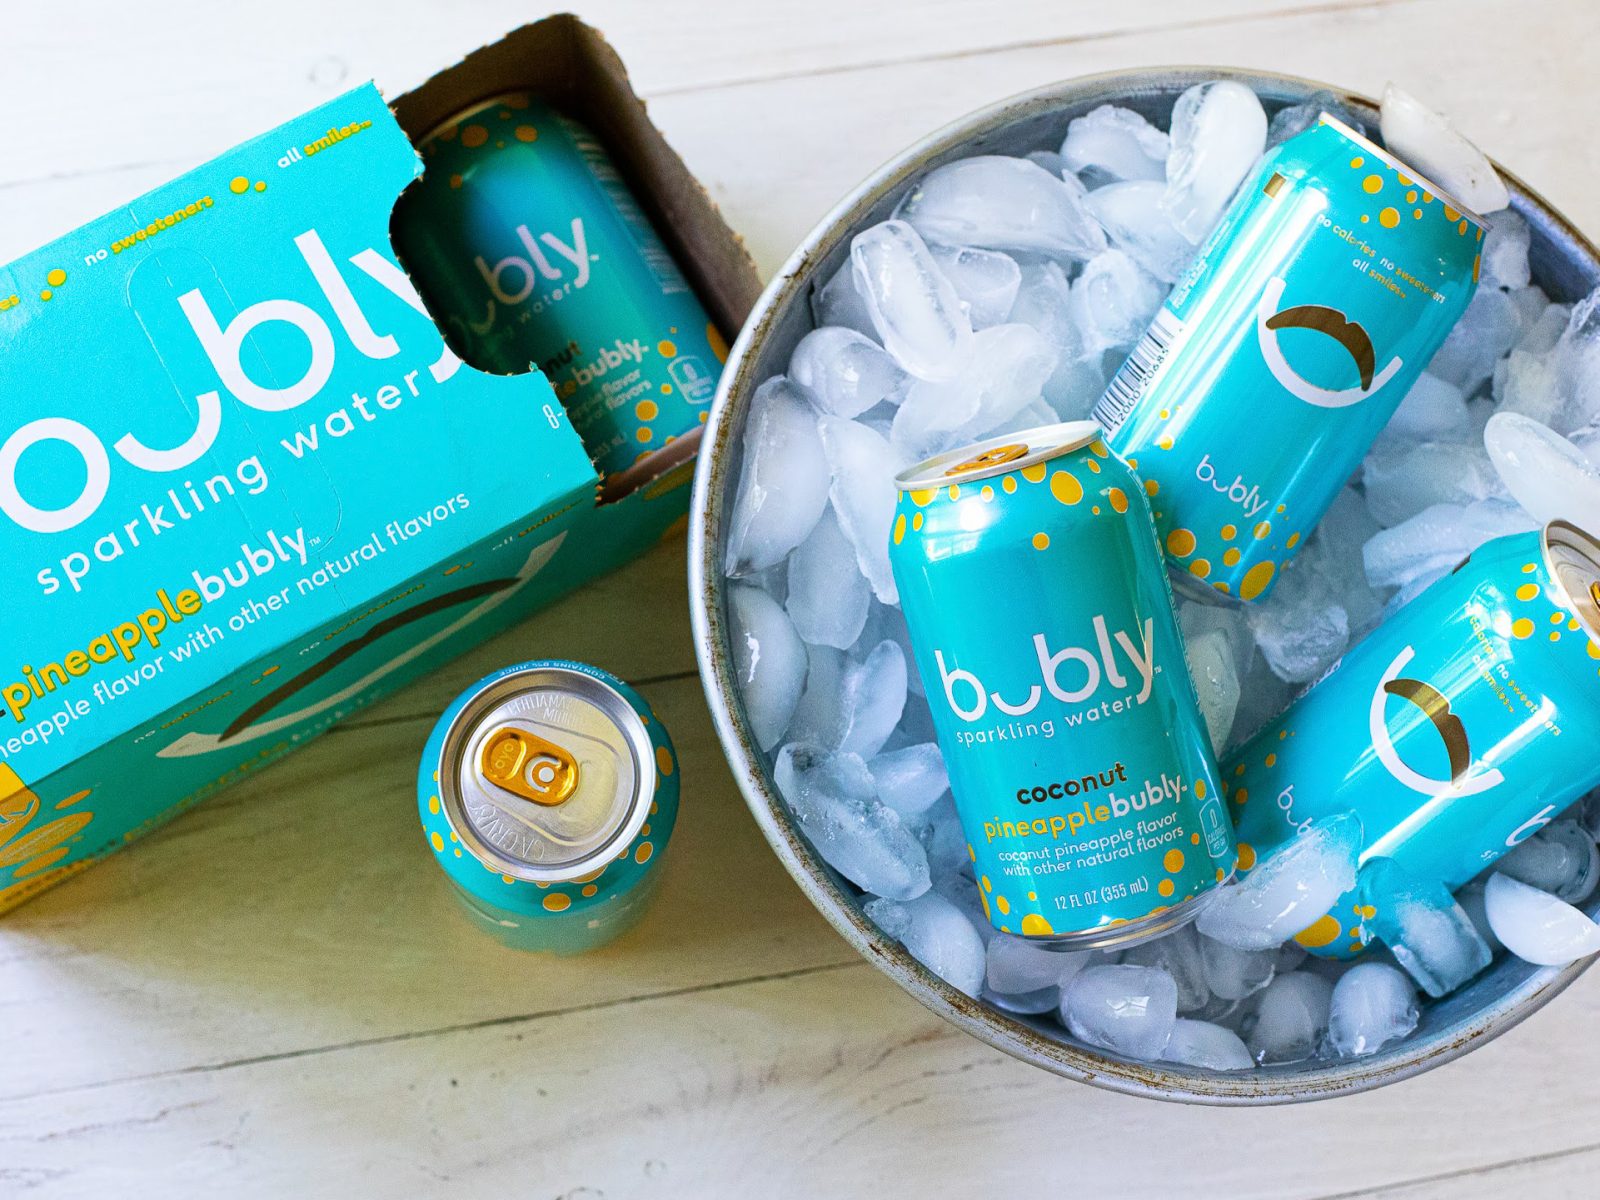 Bubly Sparkling Water As Low As $2.17 At Publix